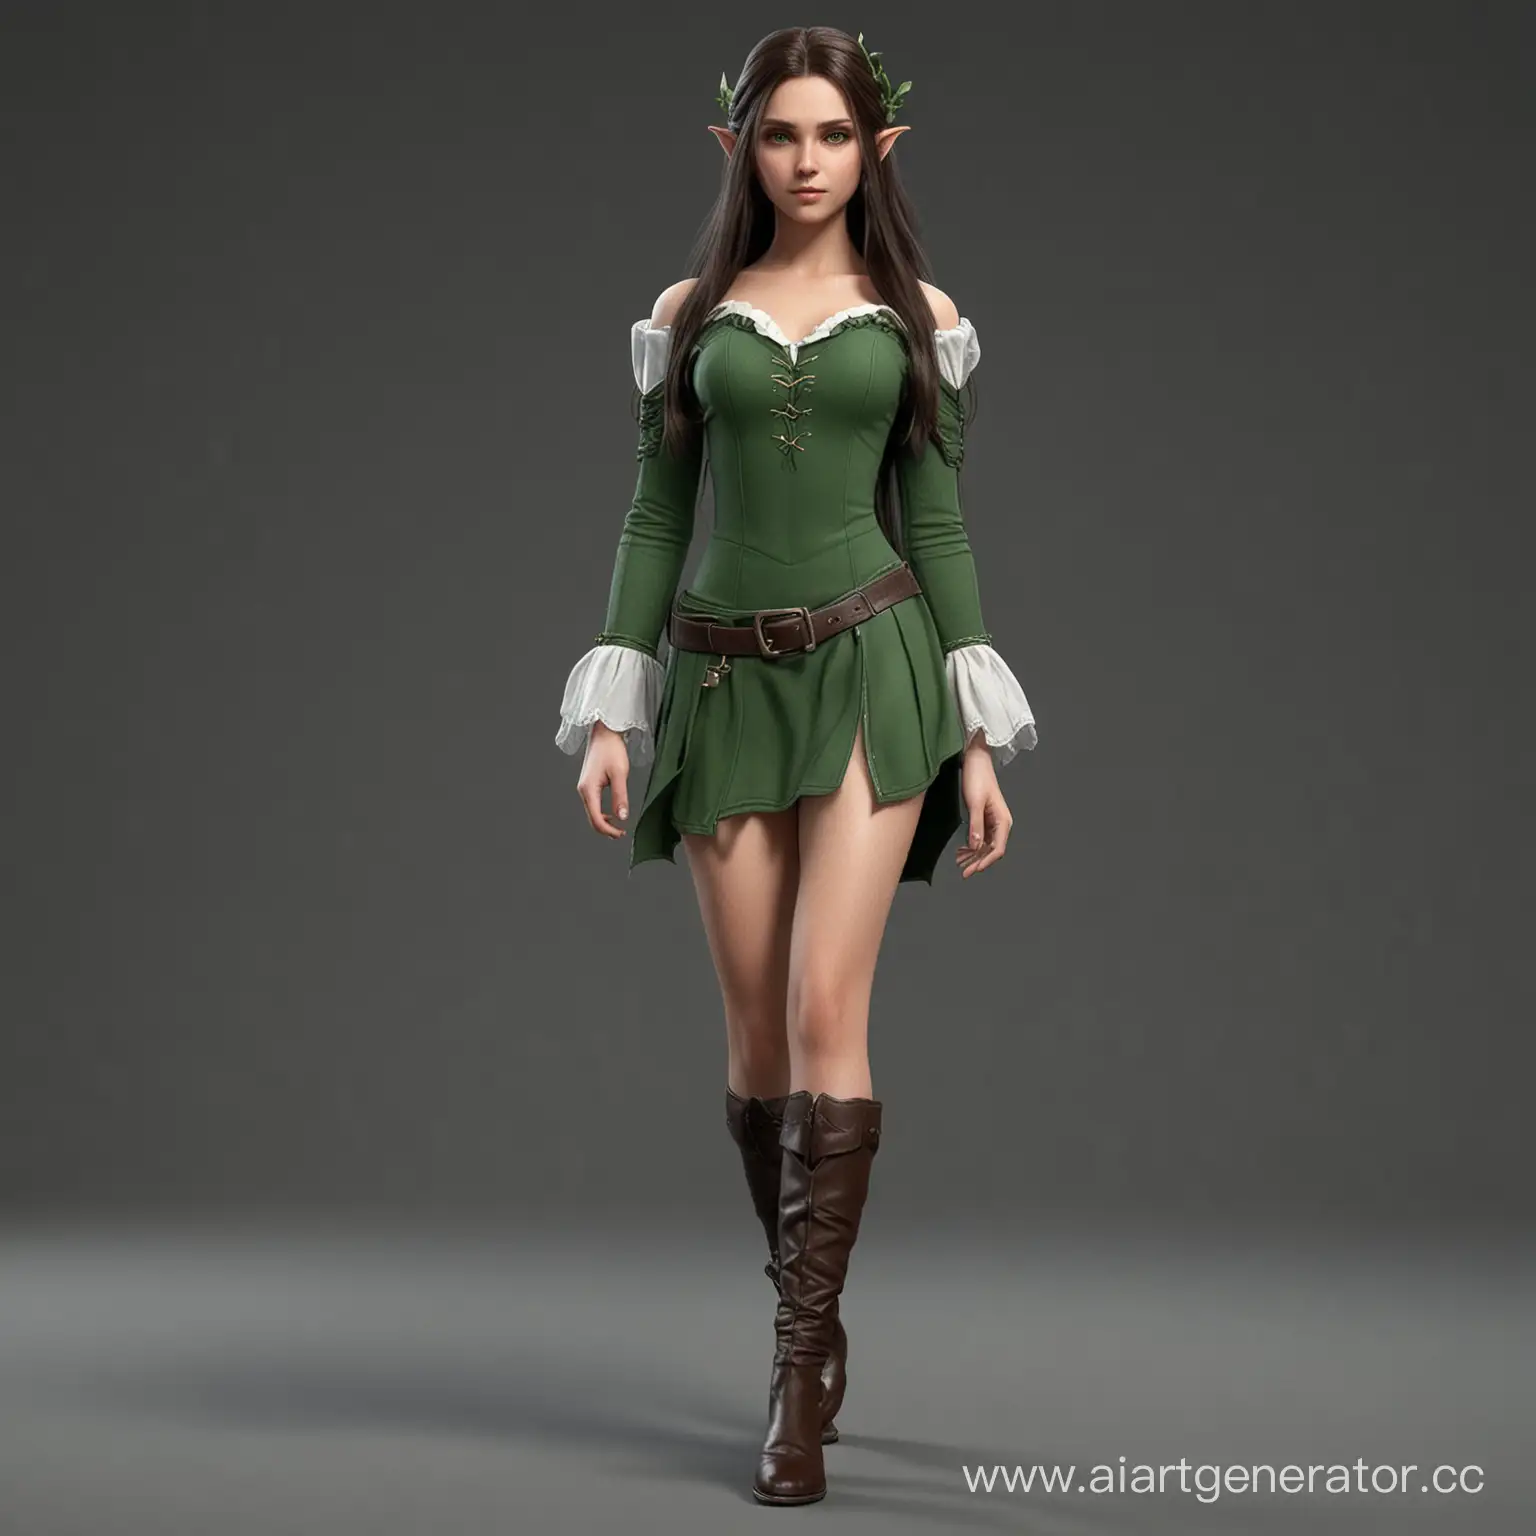 Realistic-Elf-Woman-with-Long-Dark-Hair-and-Green-Eyes-Standing-in-Fullbody-View